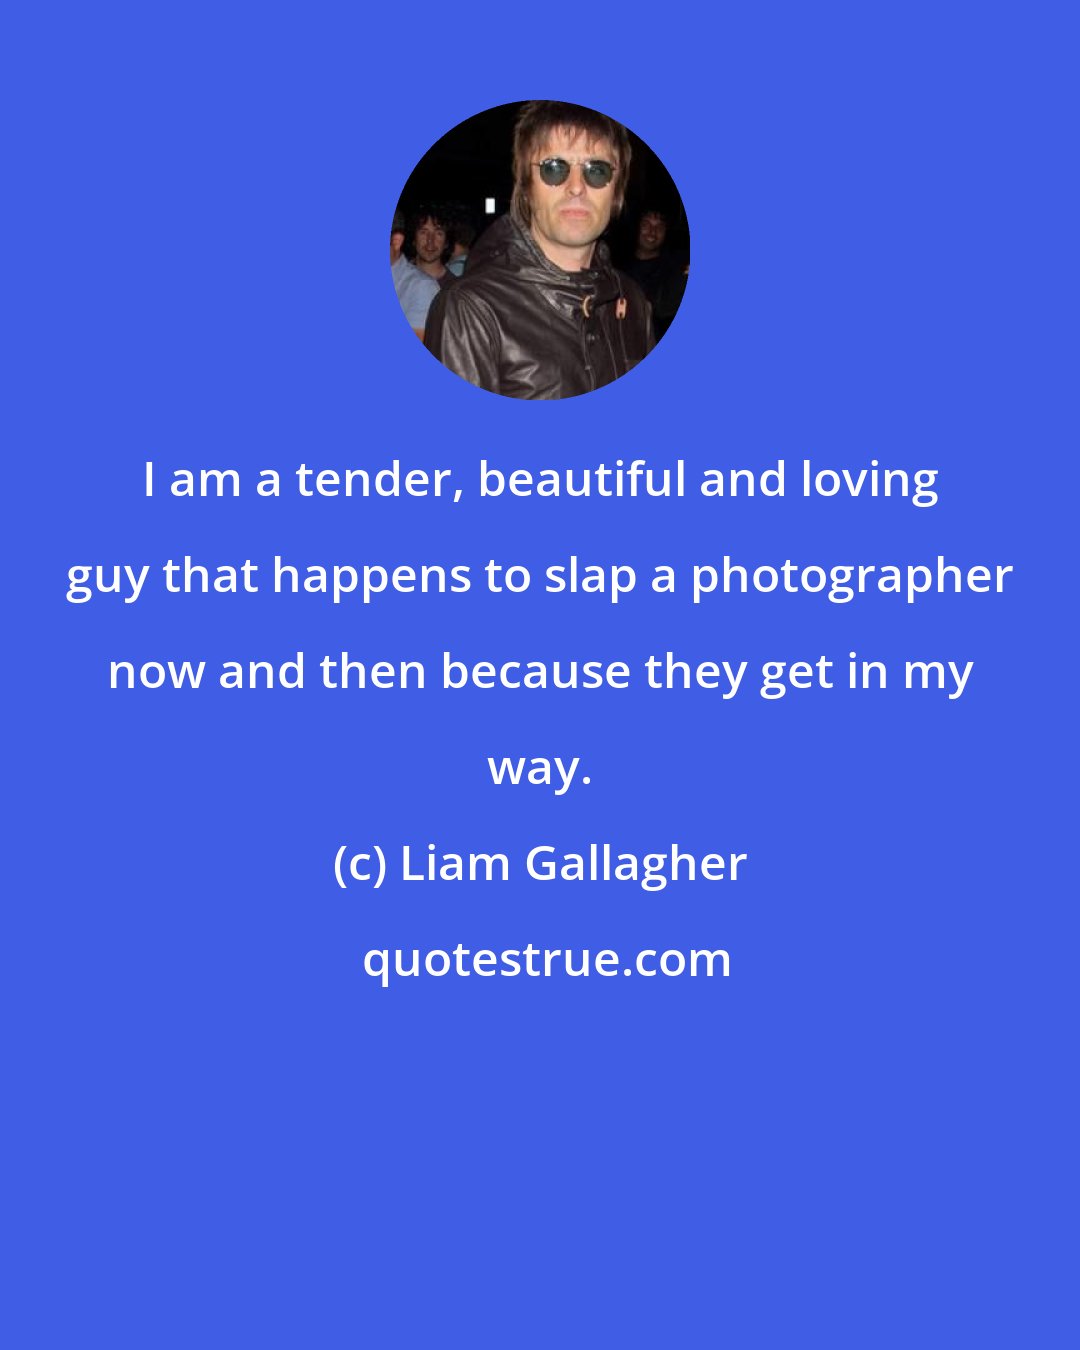 Liam Gallagher: I am a tender, beautiful and loving guy that happens to slap a photographer now and then because they get in my way.